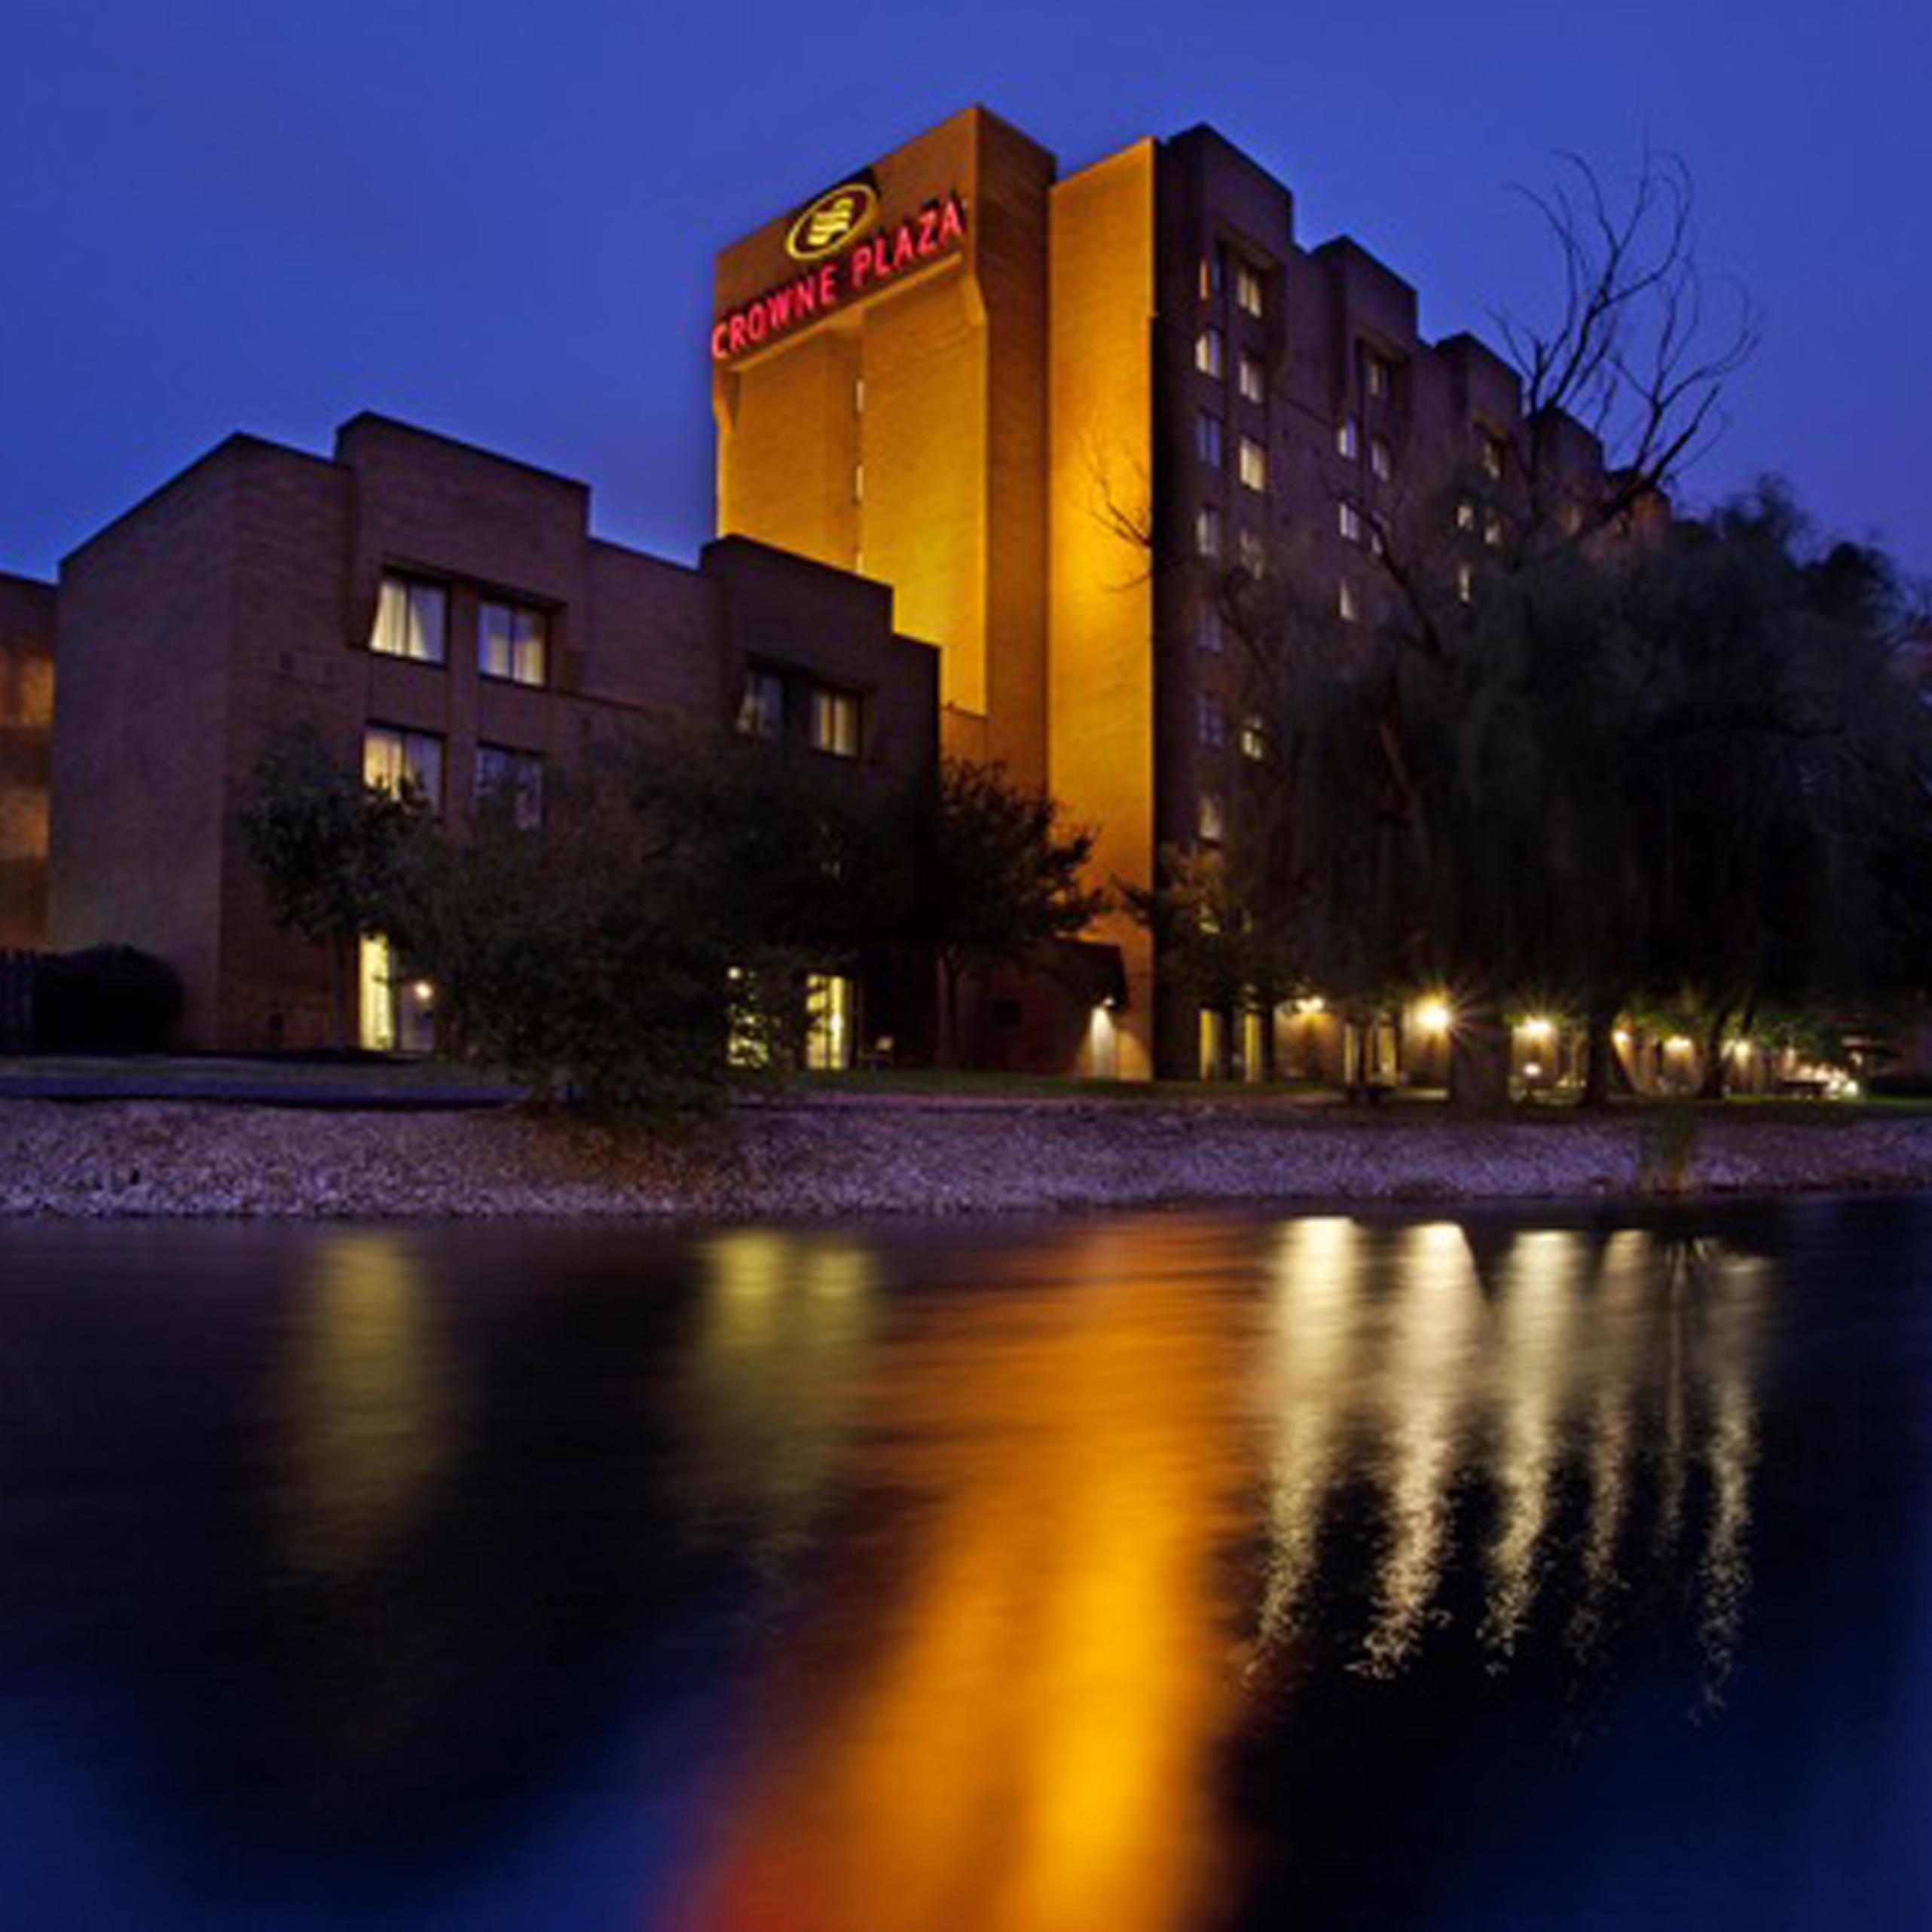 Welcome to the Crowne Plaza Columbus North-Worthington hotel.